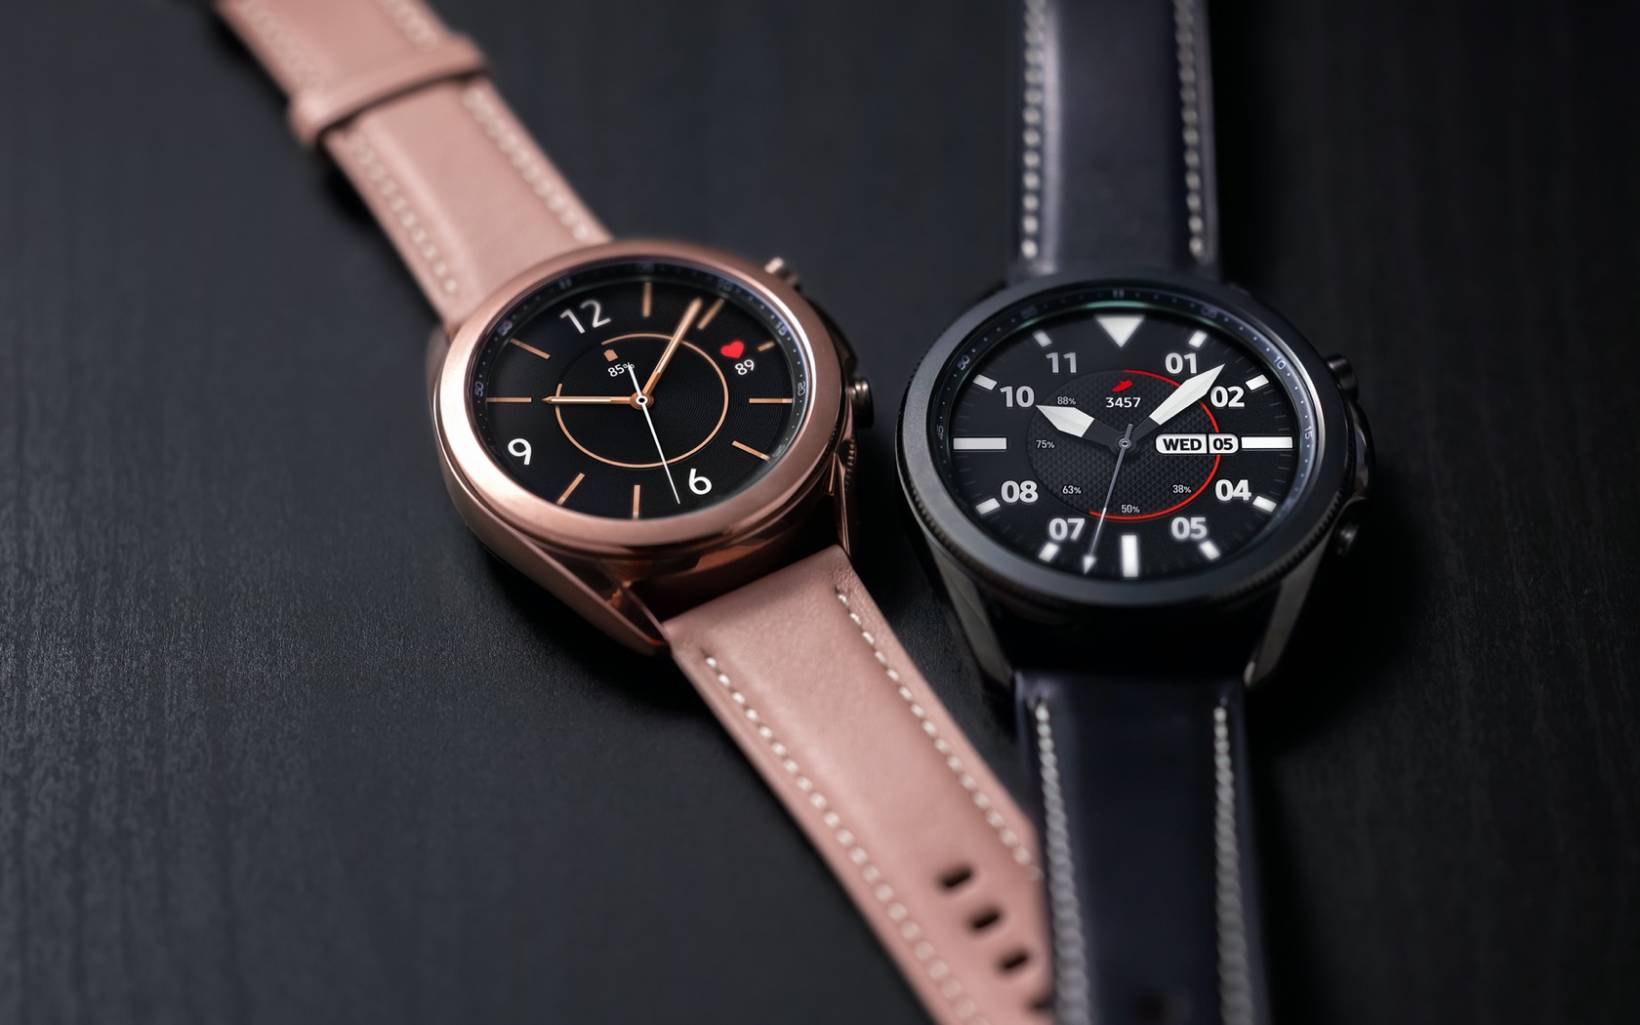 Samsung announces Galaxy Watch 3, gets FDA approval for ECG, blood pressure tracking - Android 